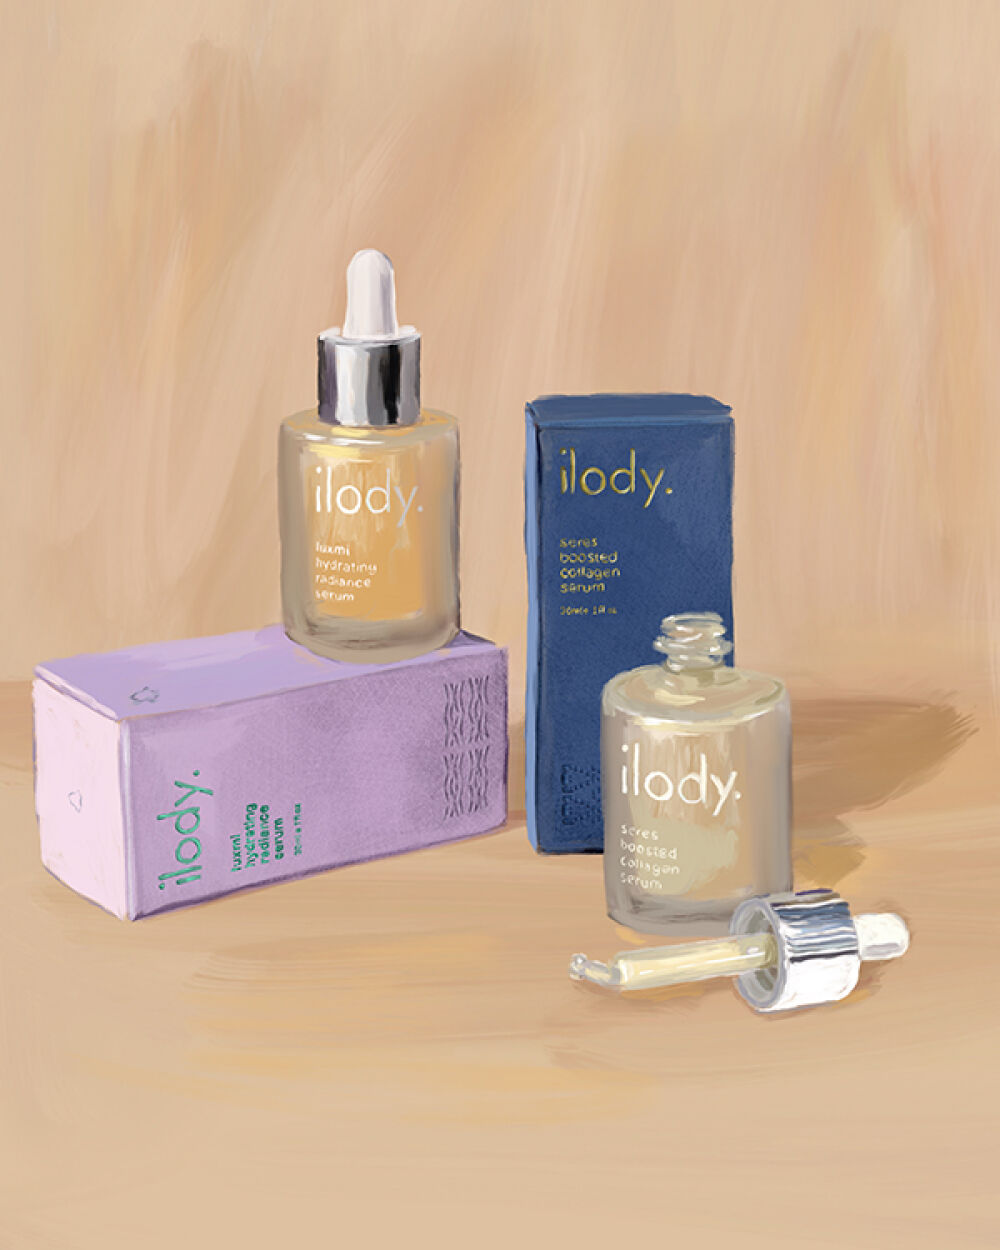 Packaging and brand identity illustration by Christina Gliha for Ilody Skincare